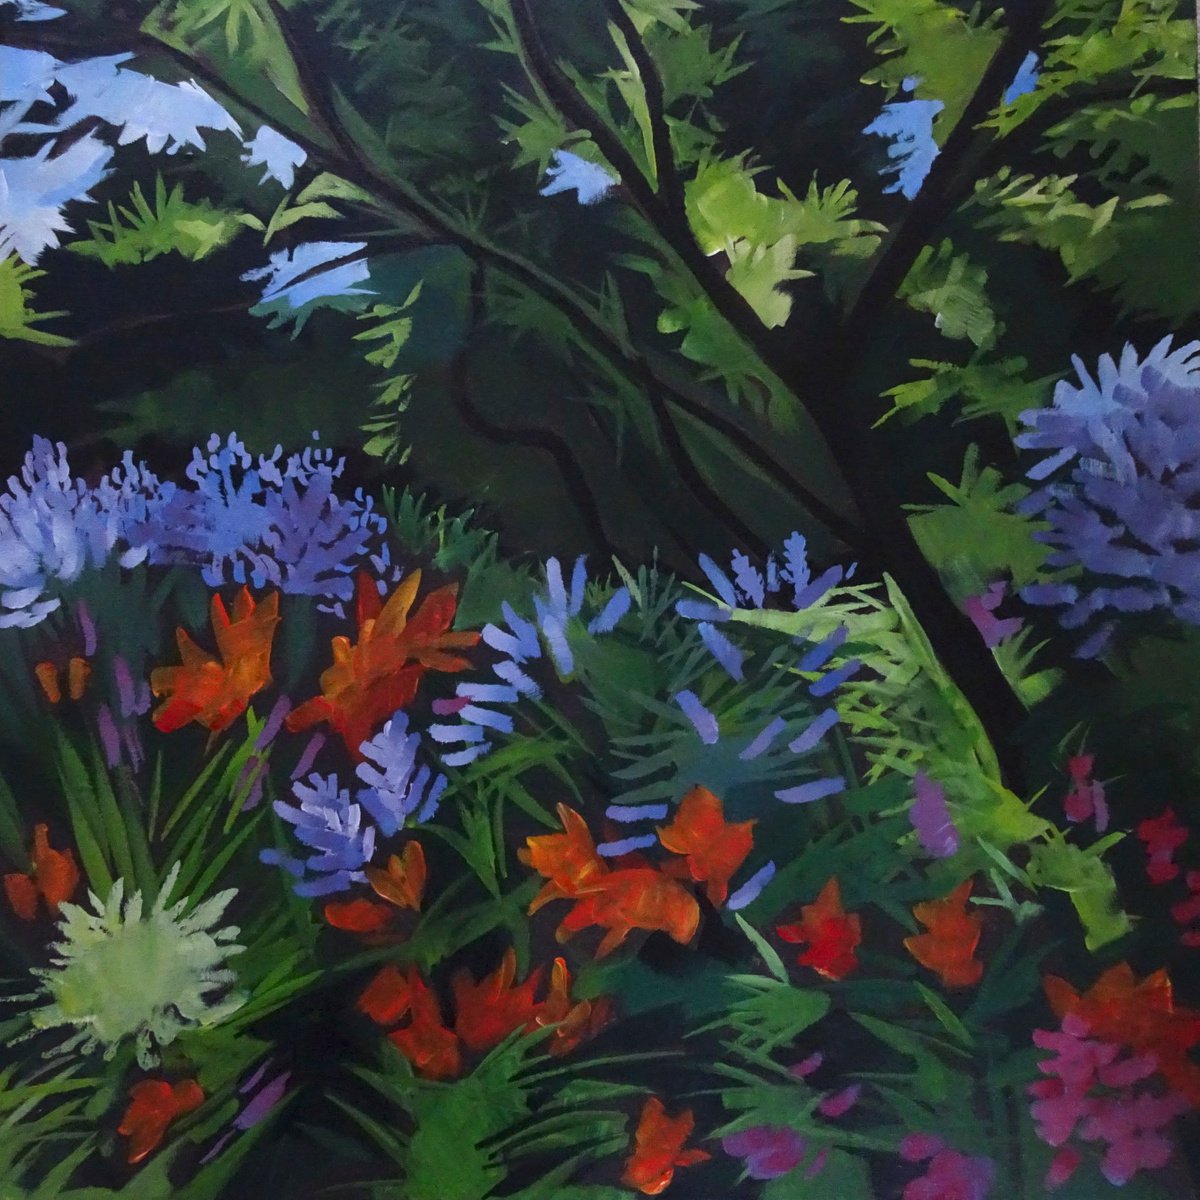 Bright Colours In The Summer Garden by Joseph Lynch